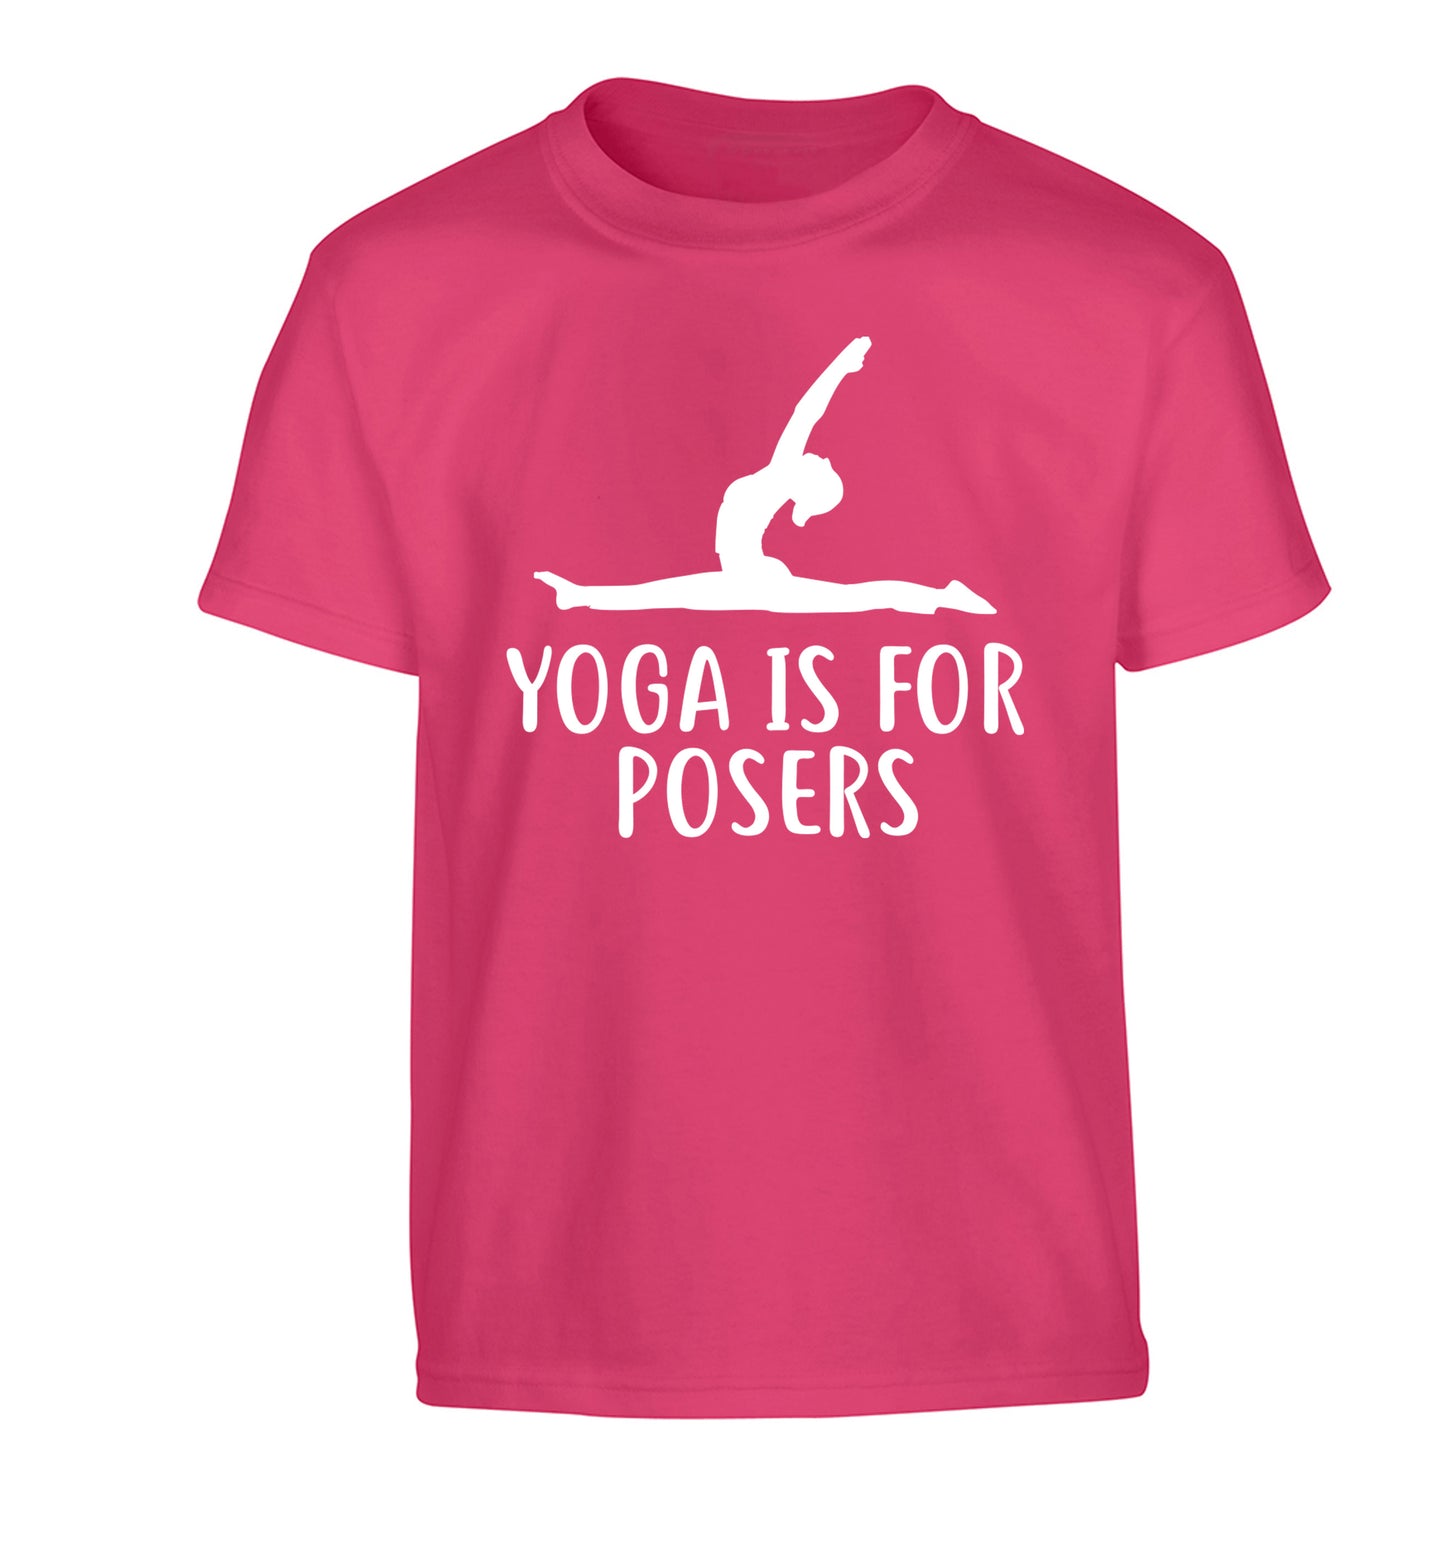 Yoga is for posers Children's pink Tshirt 12-13 Years